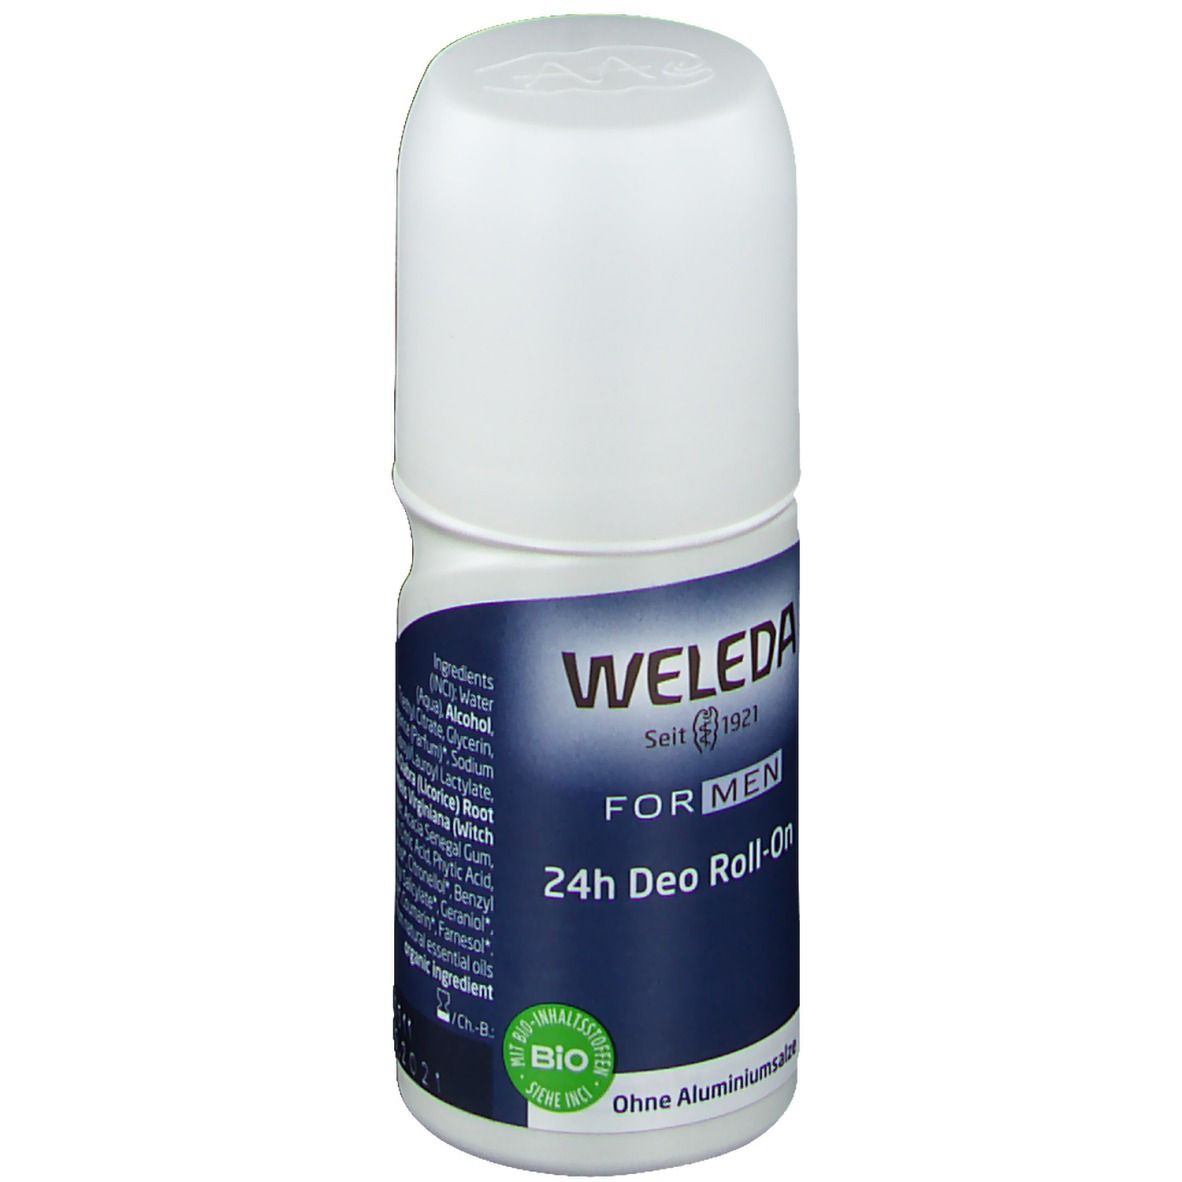 Men 24h Deo Roll-on